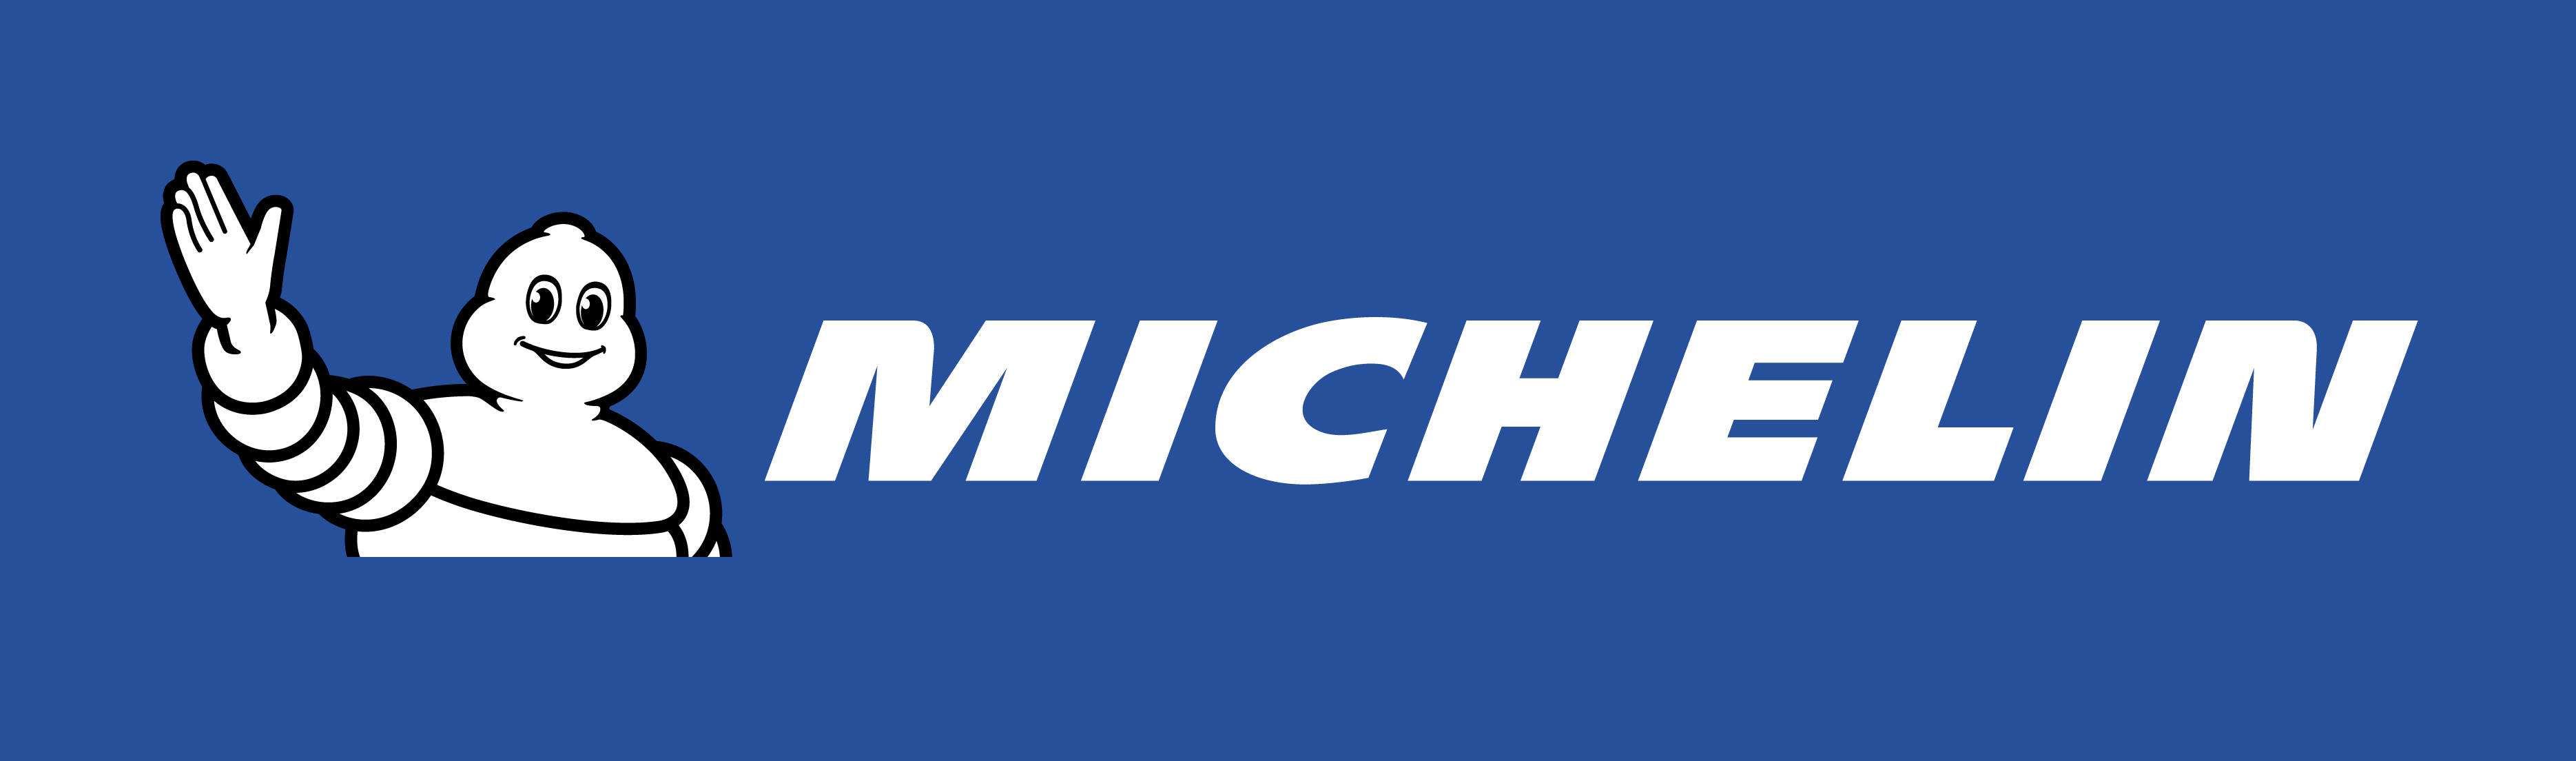 100 Michelin Wallpapers